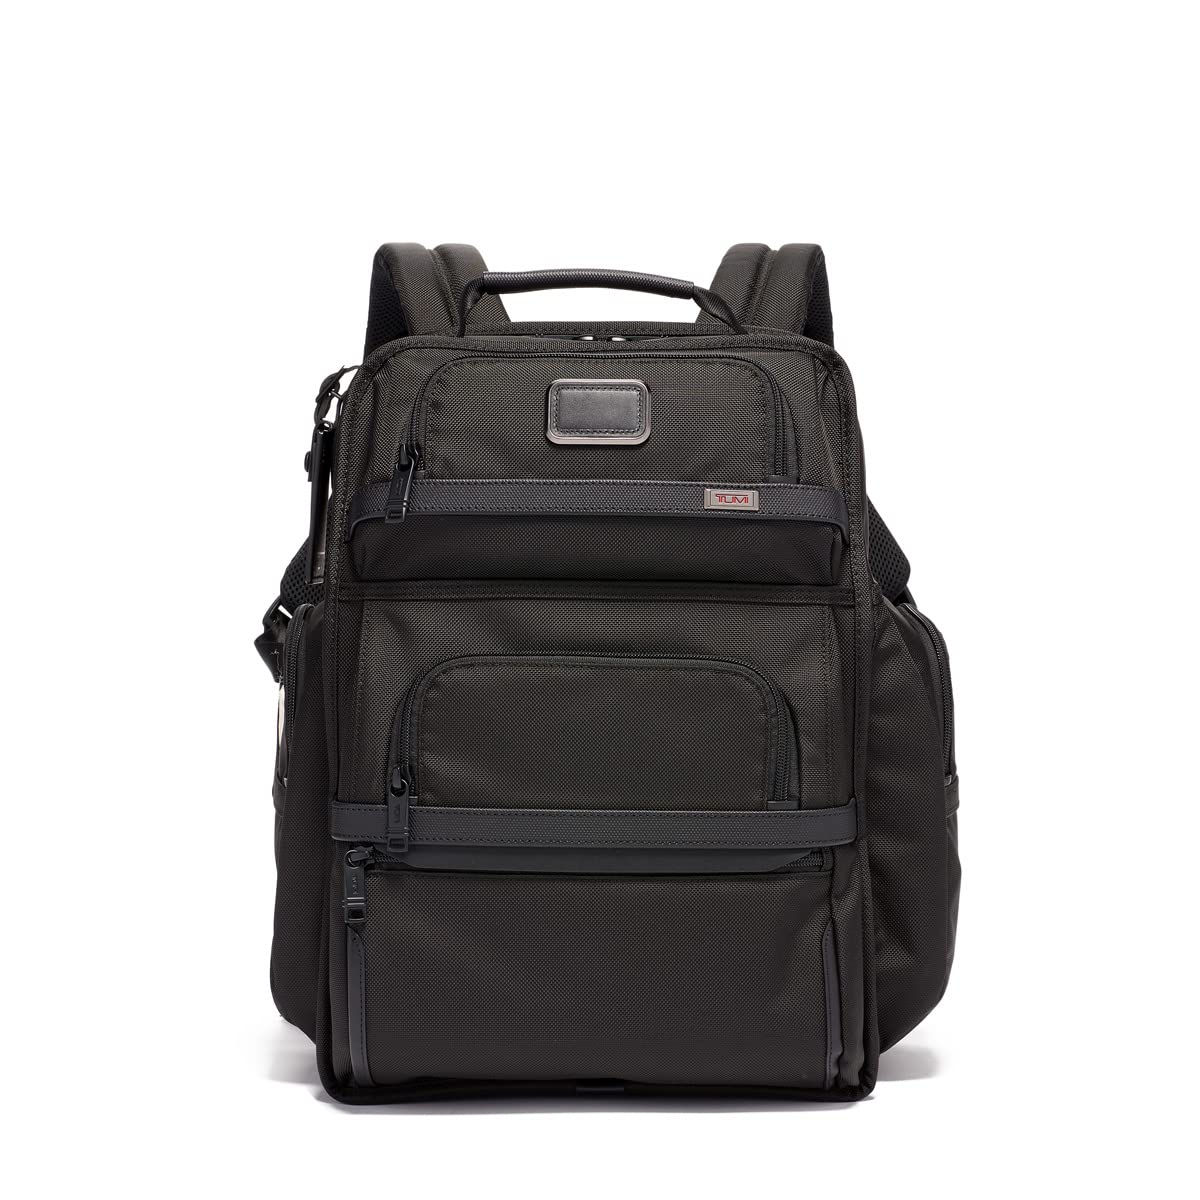 TUMI - Alpha 3 Brief Pack - 15 Inch Computer Backpack (Black) Alpha 3 Electronic Cord Pouch (Black) - Bundle